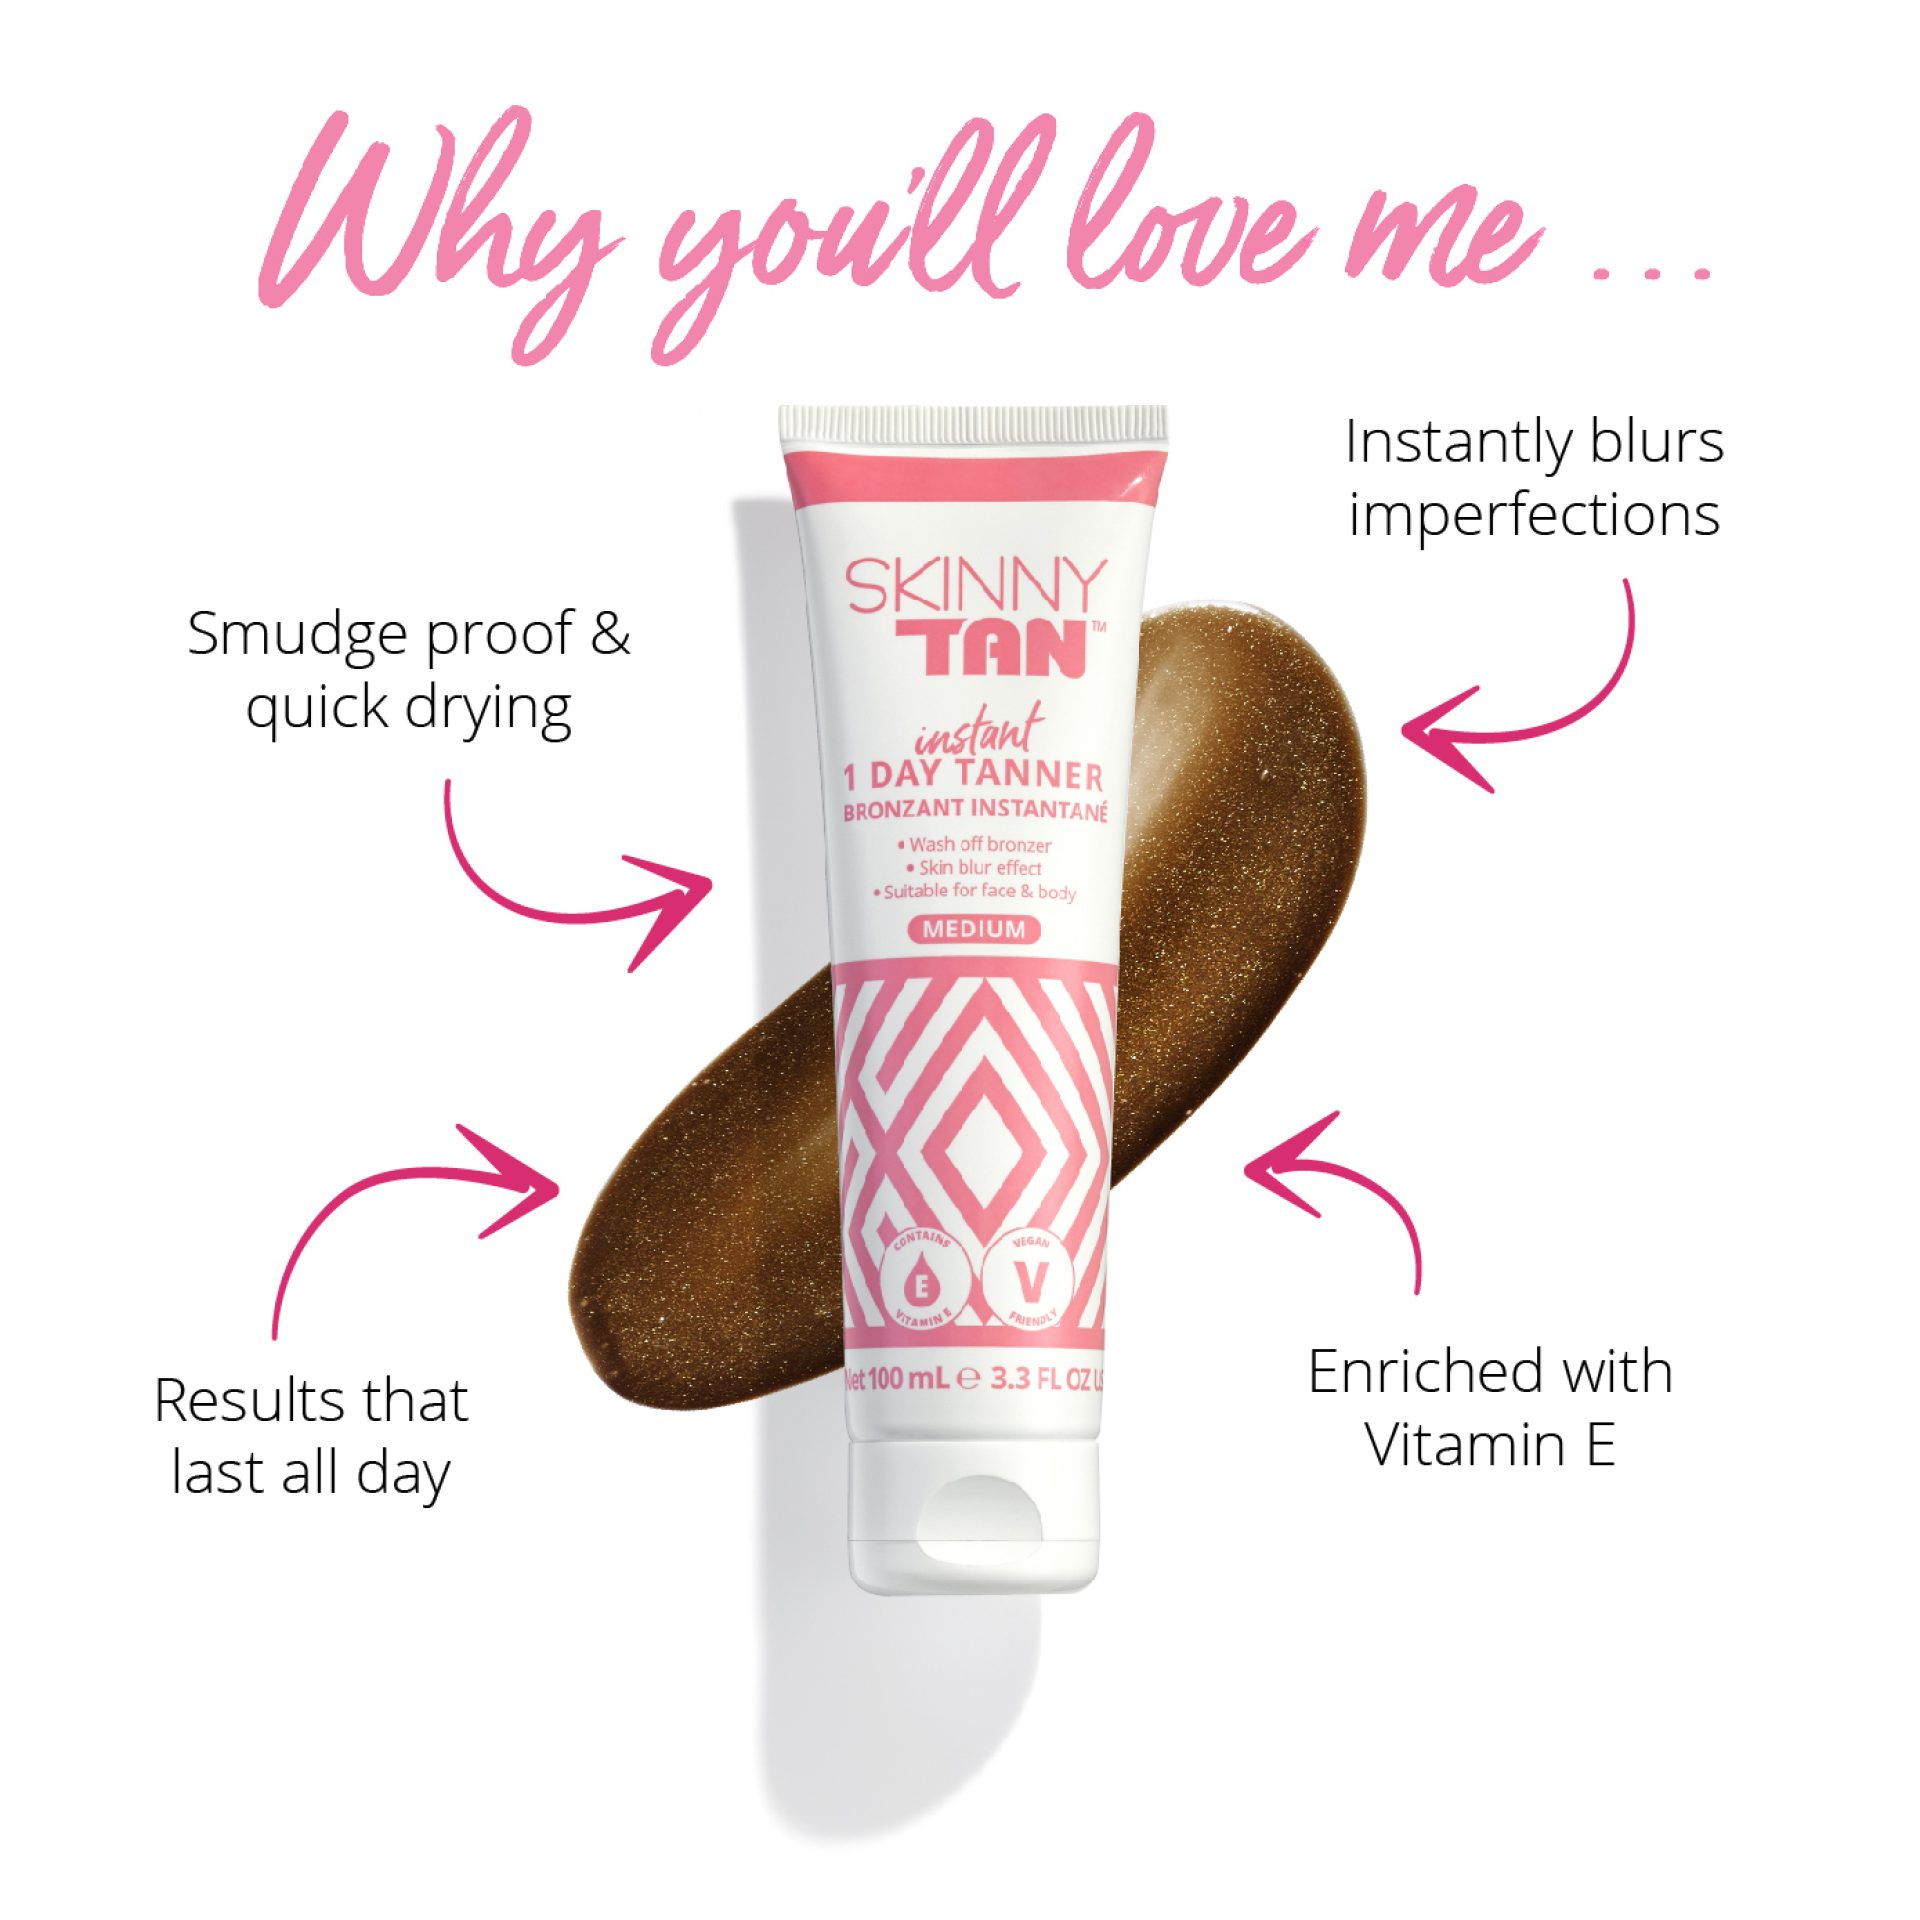 Skinny tan one day instant tanner features